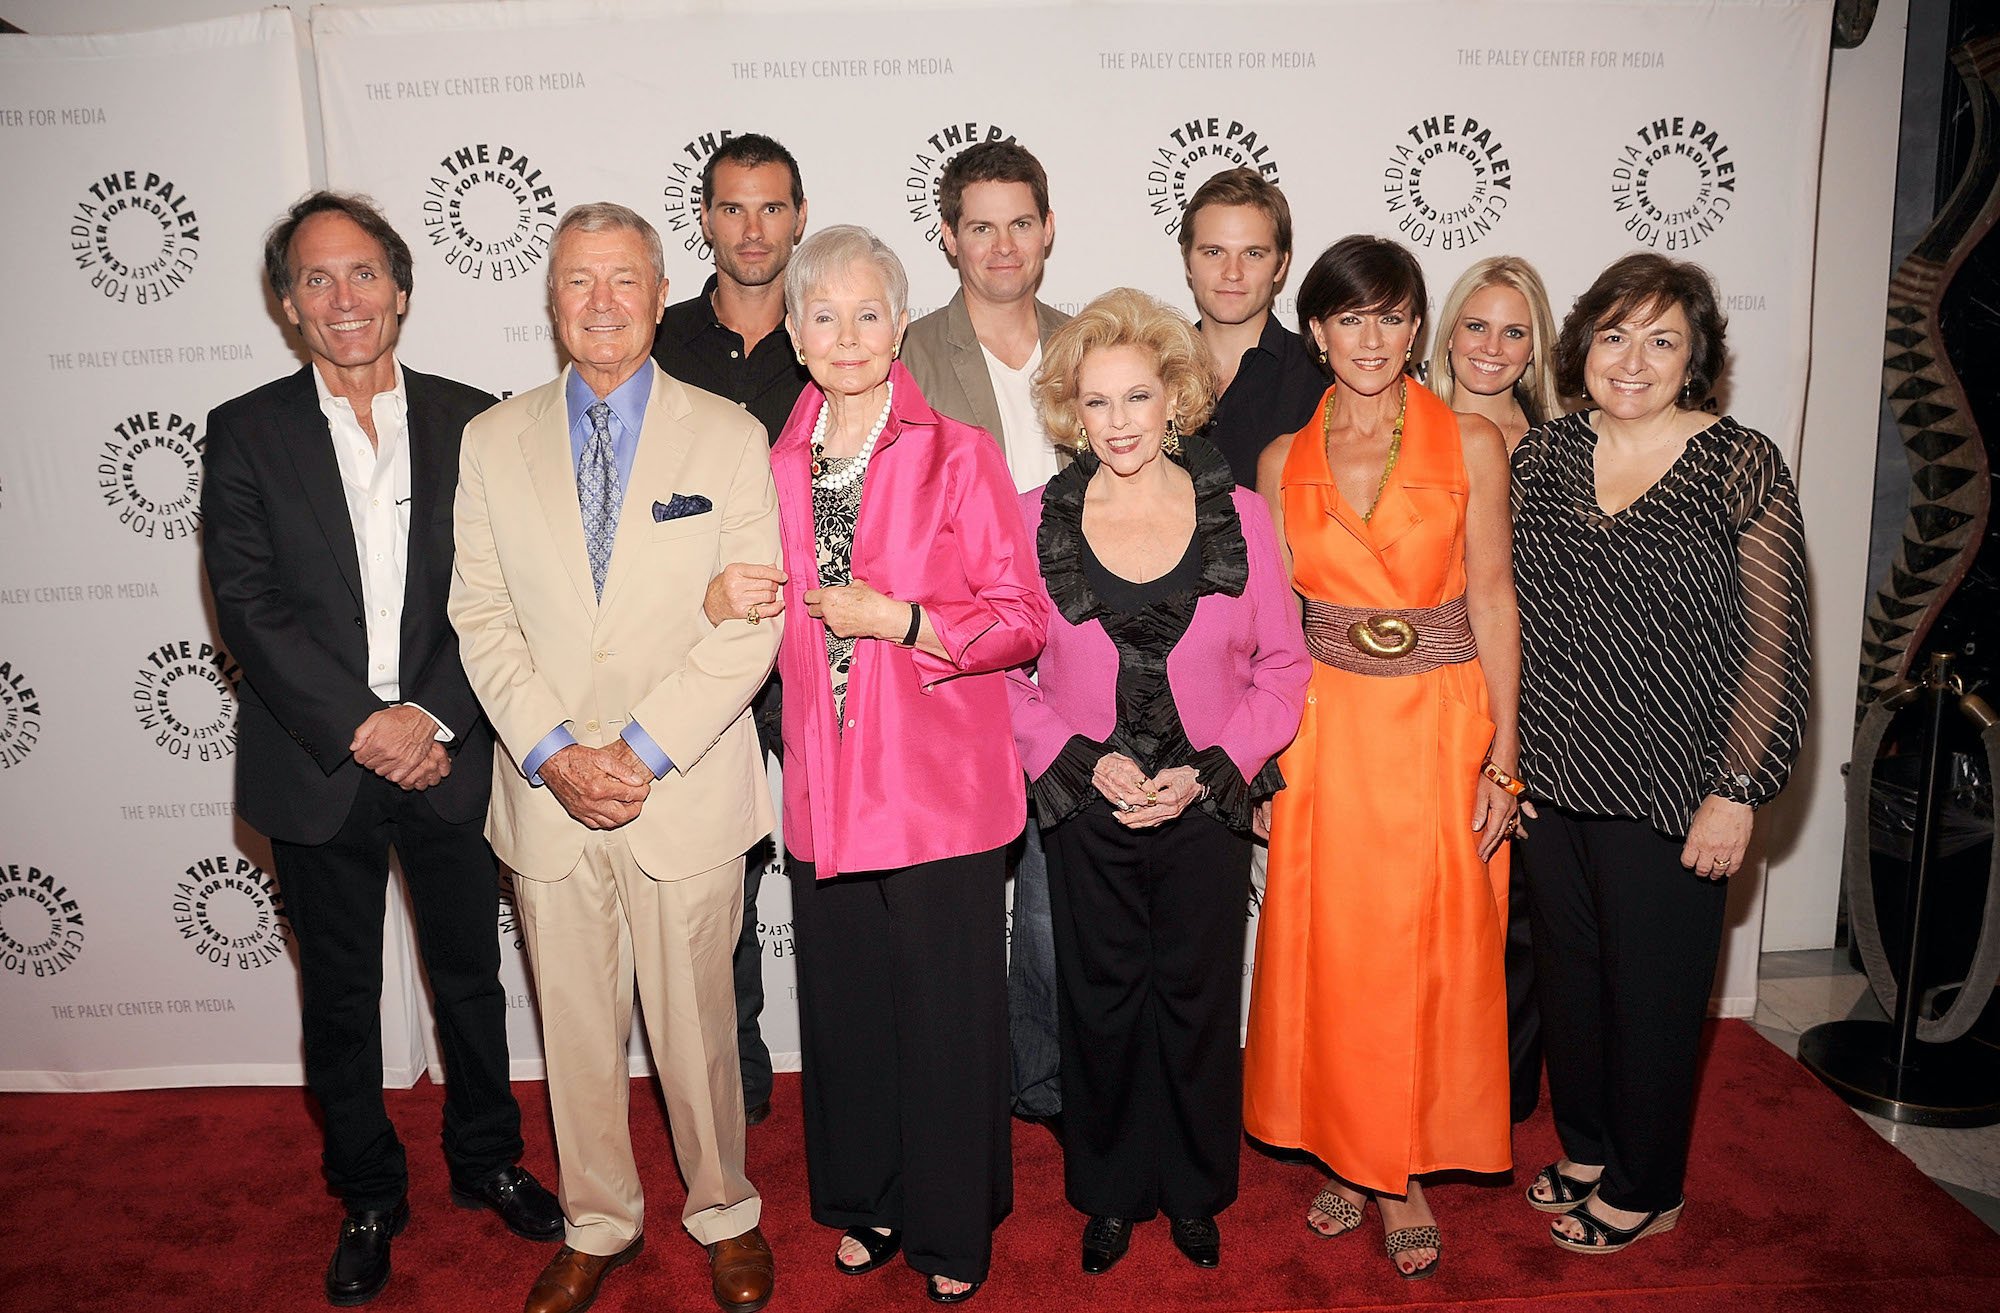 (L-R, 2nd row) Actors Austin Peck, Trent Dawson, Van Hansis, (L-R, front row) executive producer Christopher Goutman, actors Don Hastings, Kathy Hays, Eileen Fulton, Colleen Zenk, Terry Colombino, and writer Jean Passanante smiling